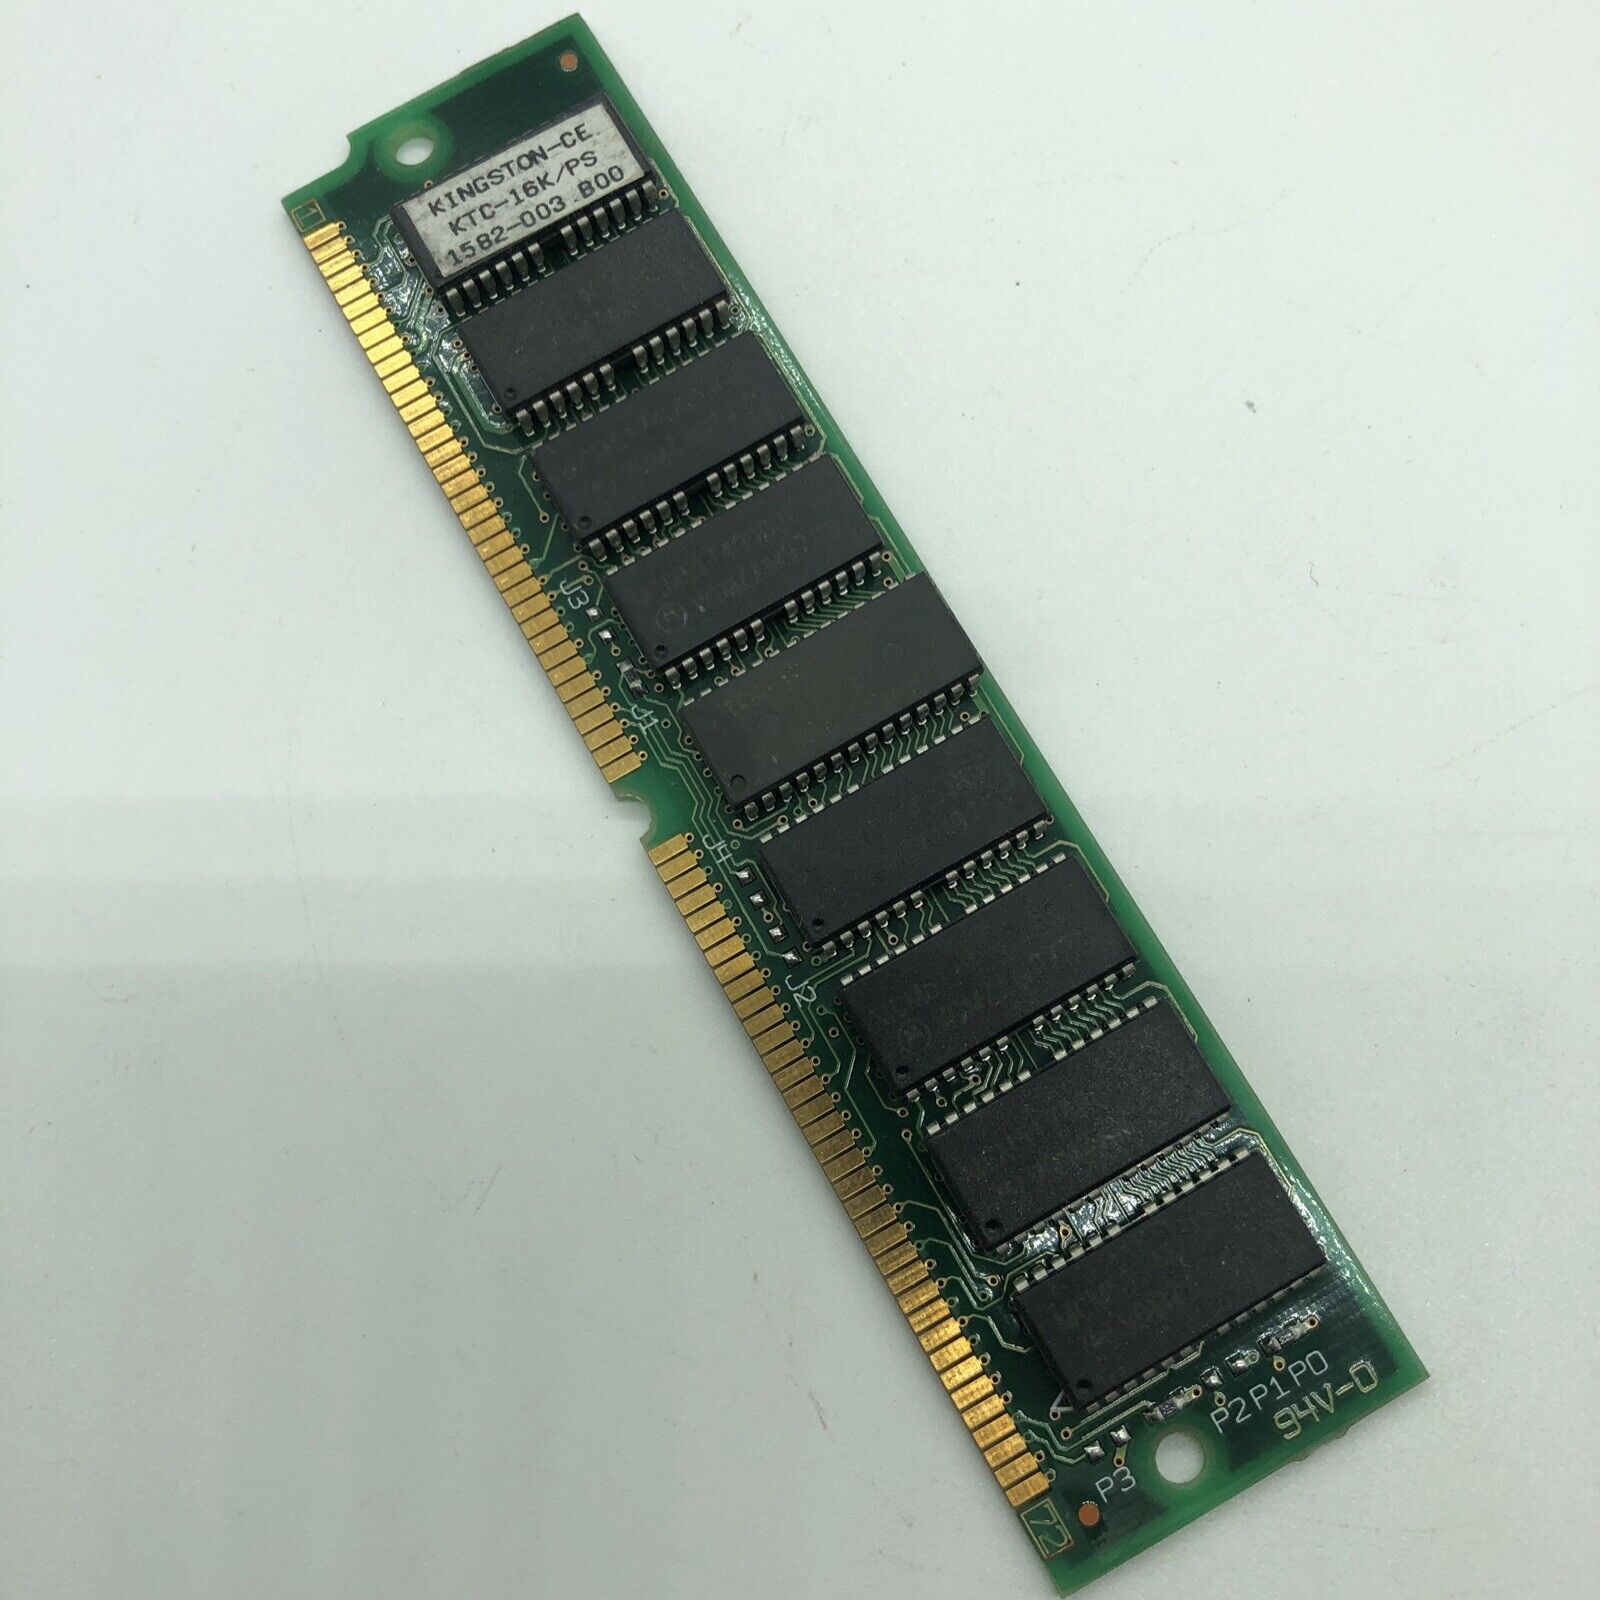  16MB FPM PARITY 60NS SIMM 72-PIN 4X36 Memory 16 Meg Vintage Chips Fast Page